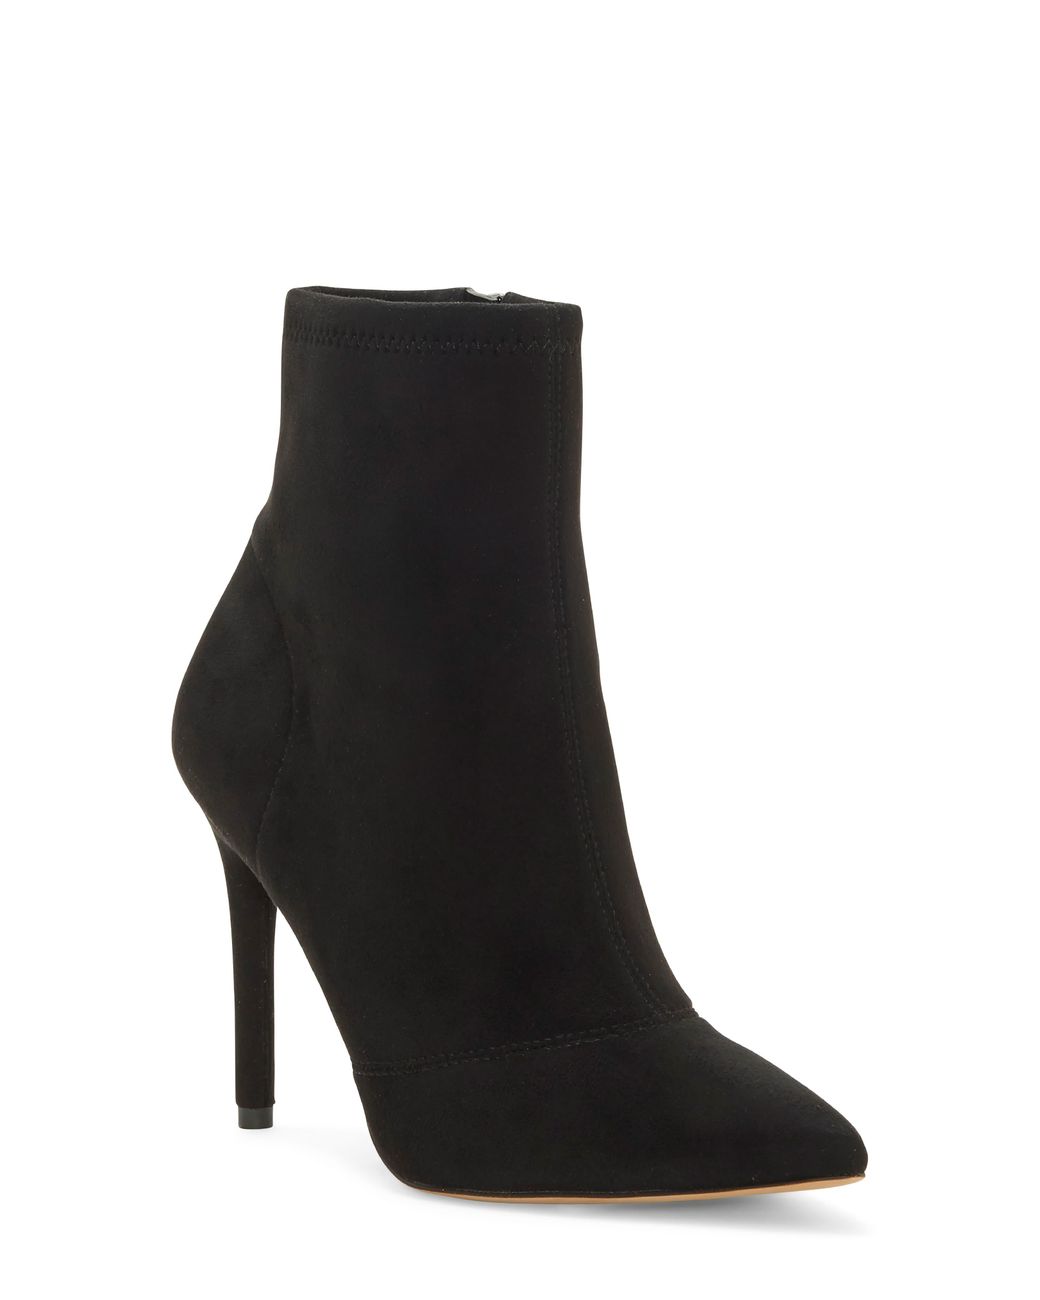 Jessica Simpson Lailra Pointed Toe Stiletto Boot in Black | Lyst